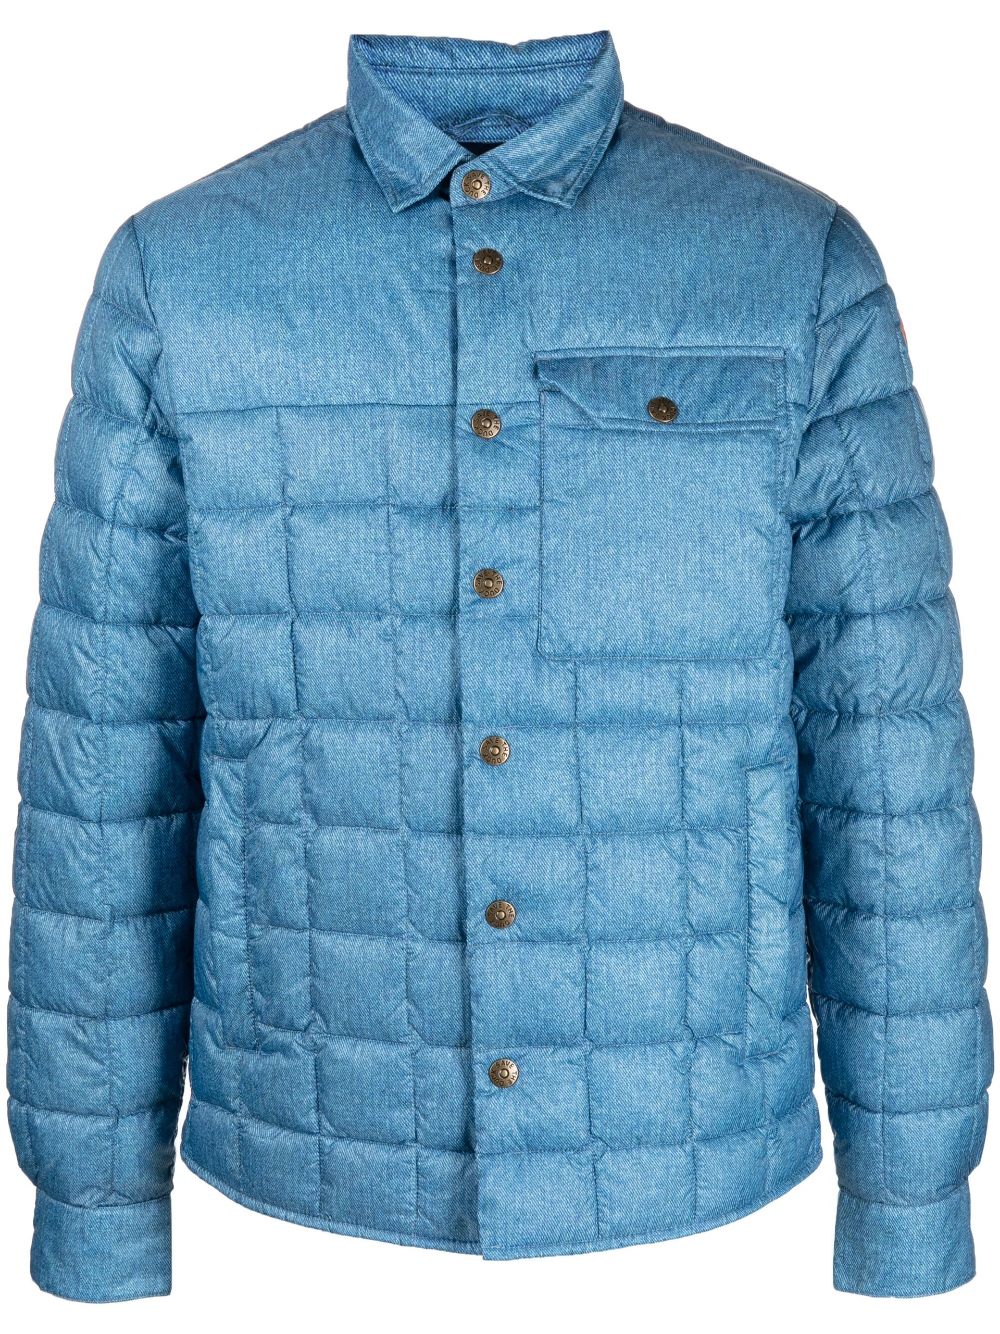 SAVE THE DUCK TURQUOISE JACKET